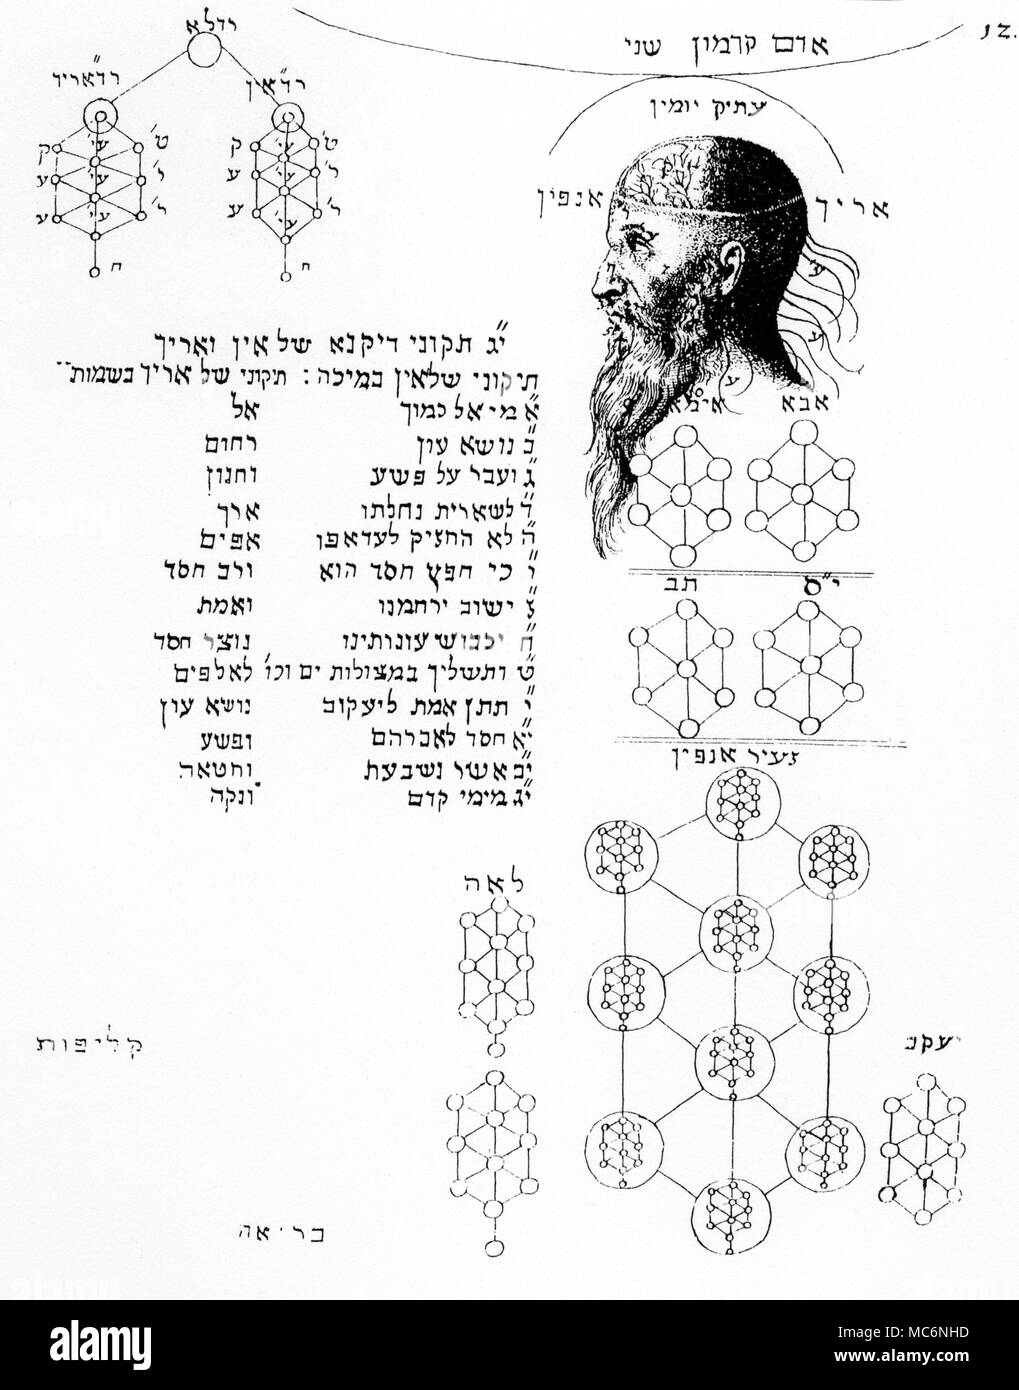 Page from C. Knorr von Rosenroth, 'Kabbala denudata [1684], depicting ADam Kadmon, and a number of arrangements of the sephirothic tree. Stock Photo